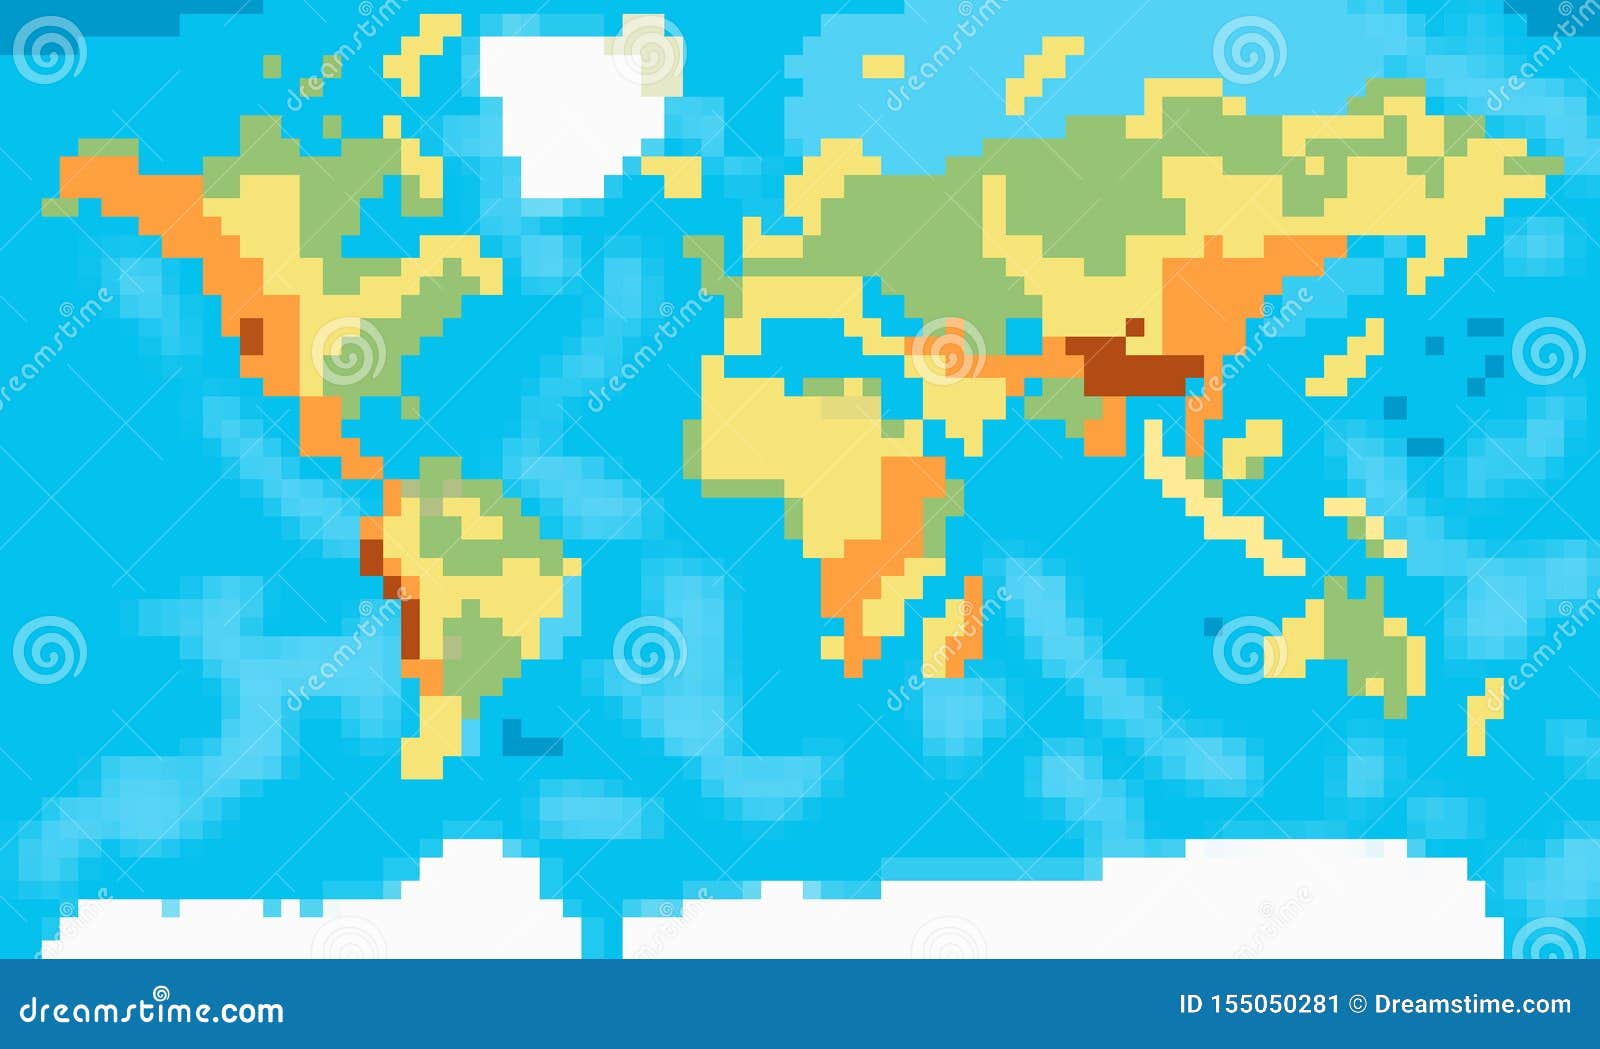 The Physical Map of the World. Pixel Art Stock Illustration